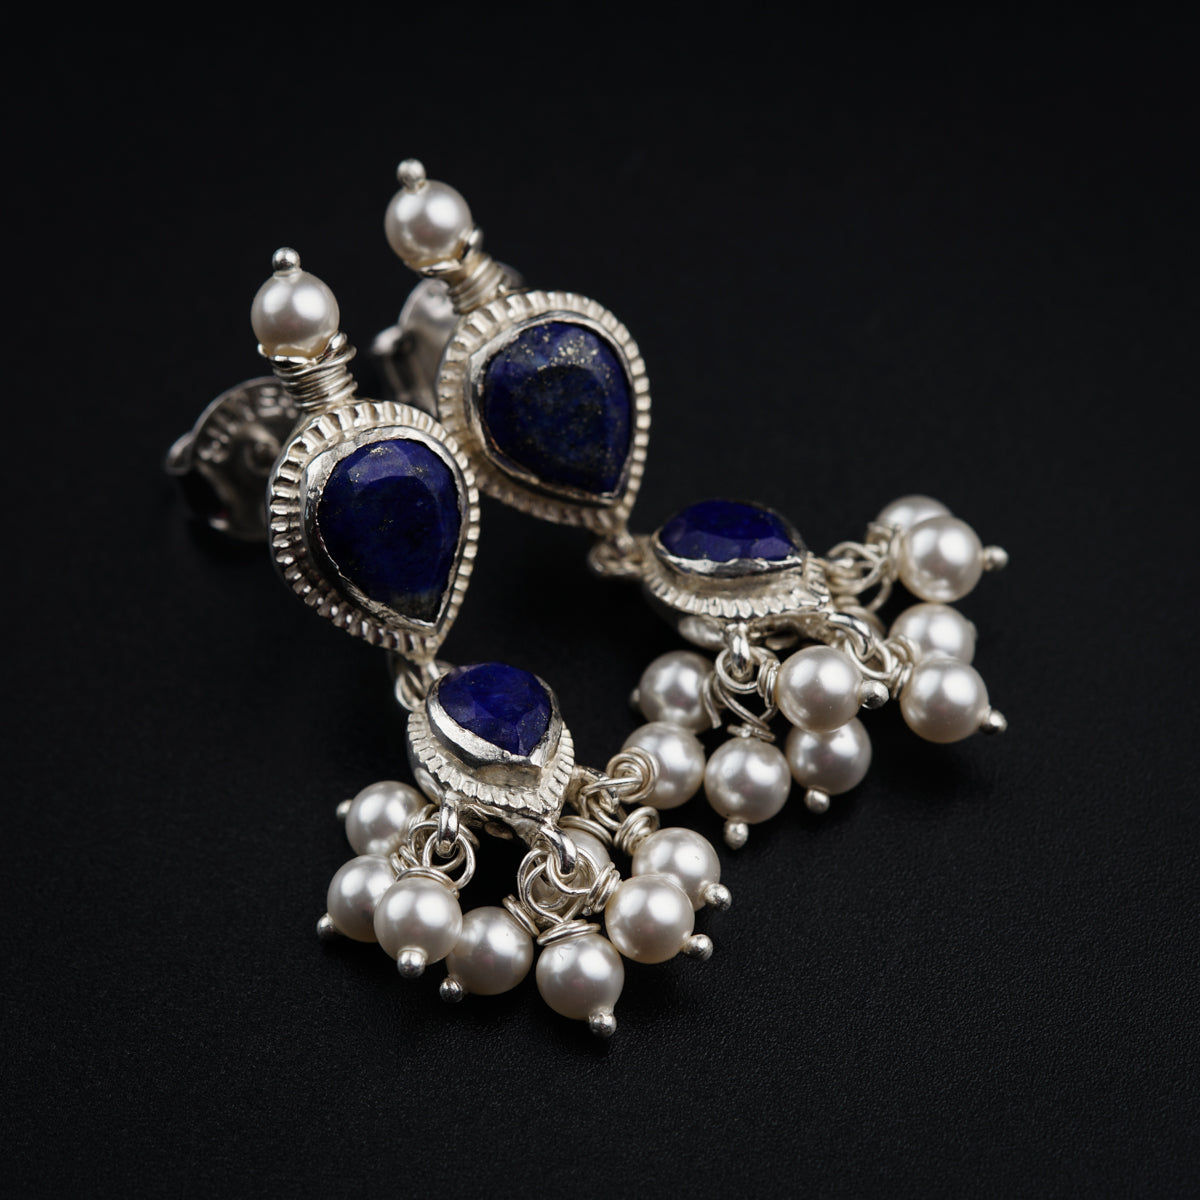 a close up of a pair of blue and white earrings